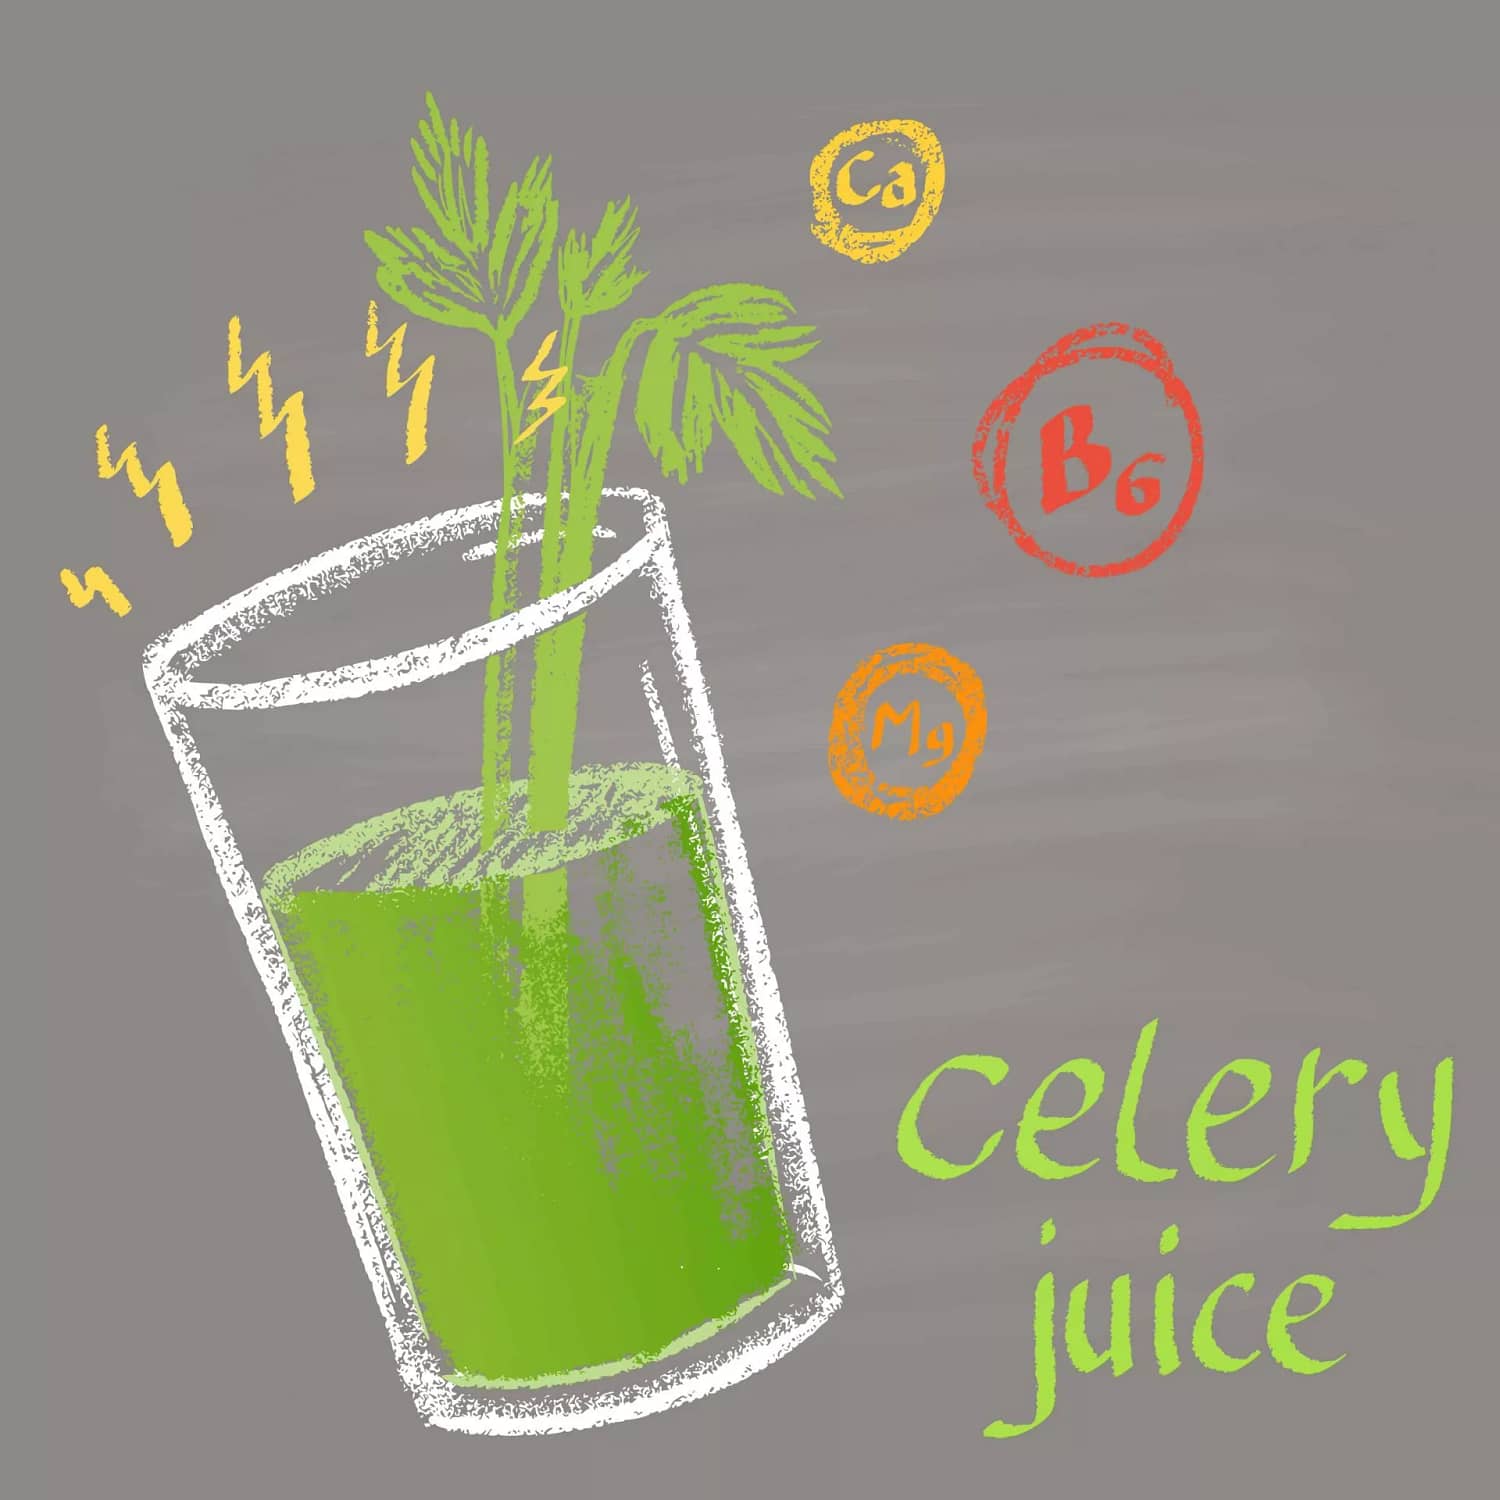 Celery Juice Mineral infographic